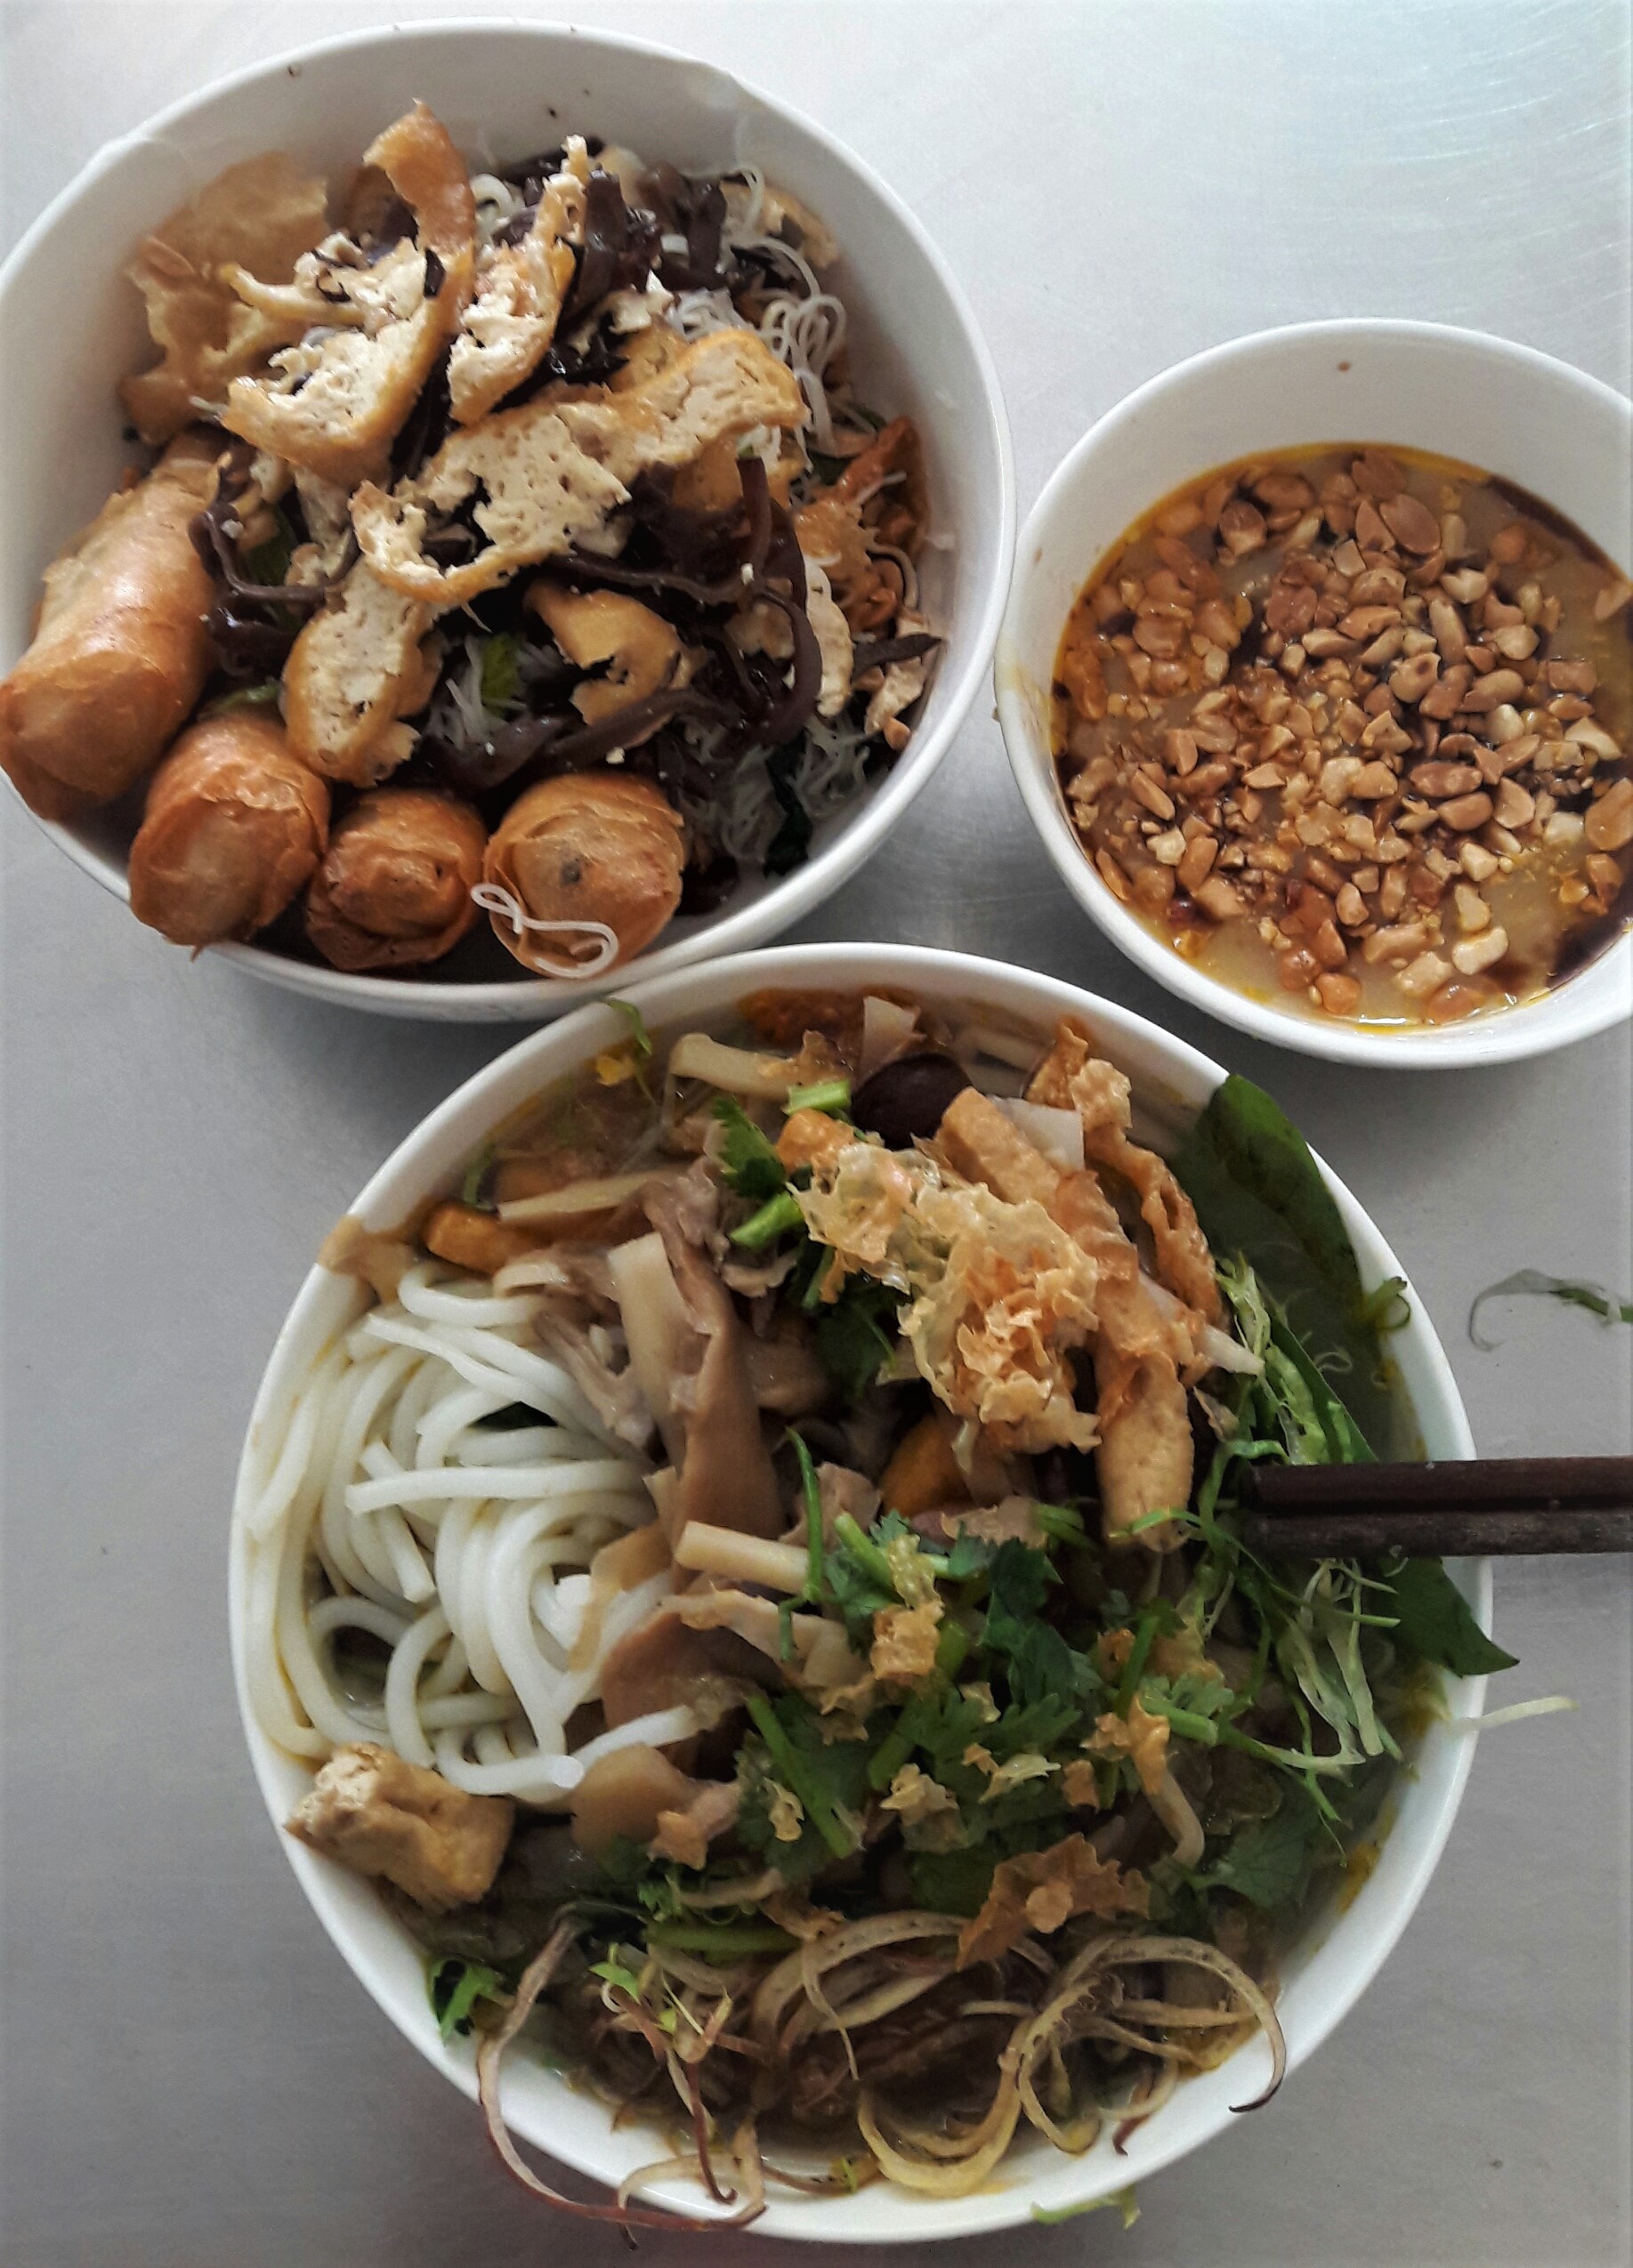 Bun chay noodles and cha gio spring rolls